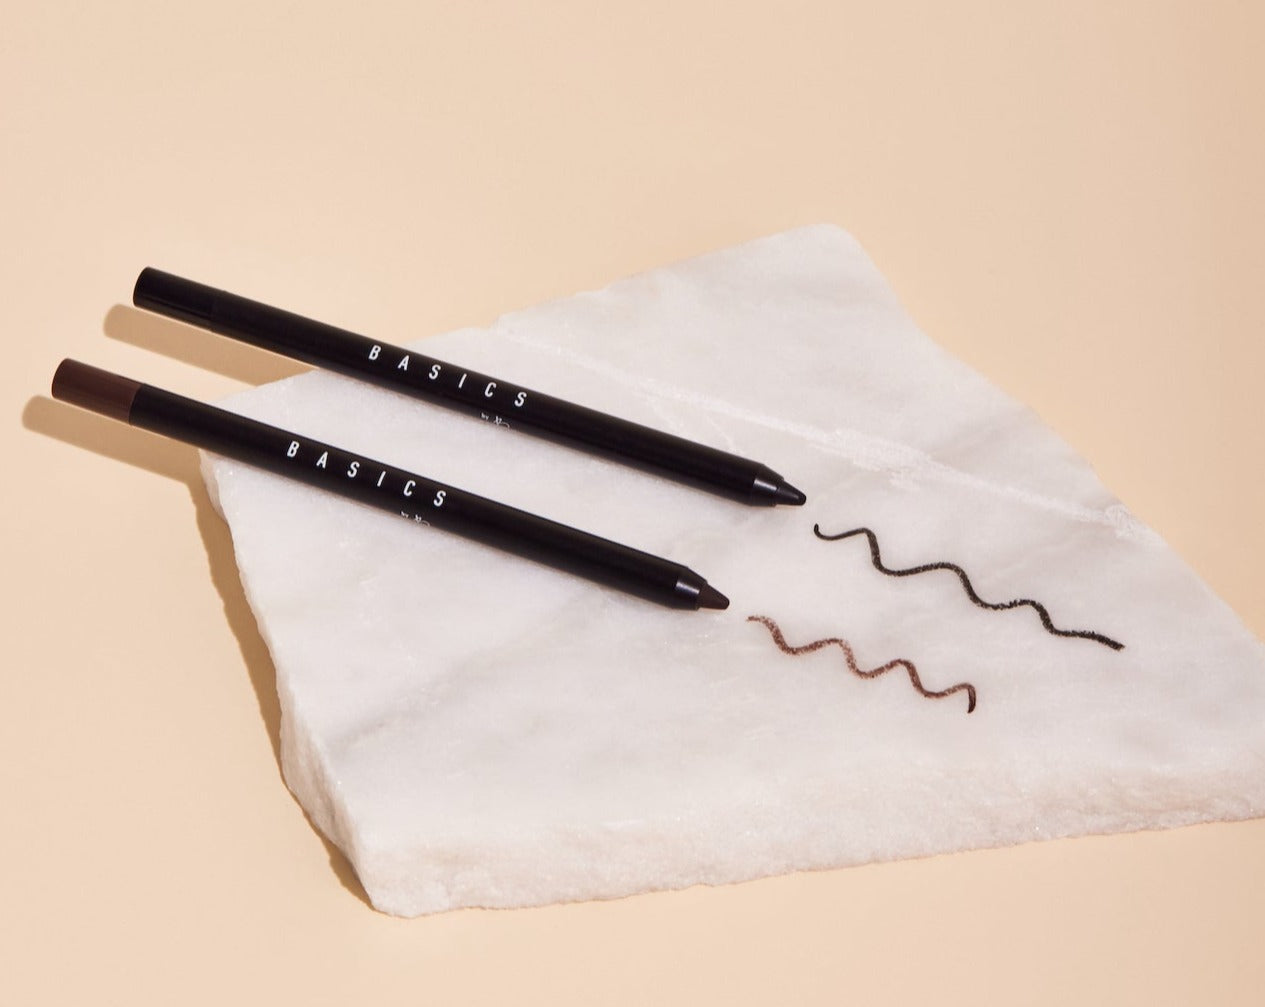 The Classic Pencil Eyeliner